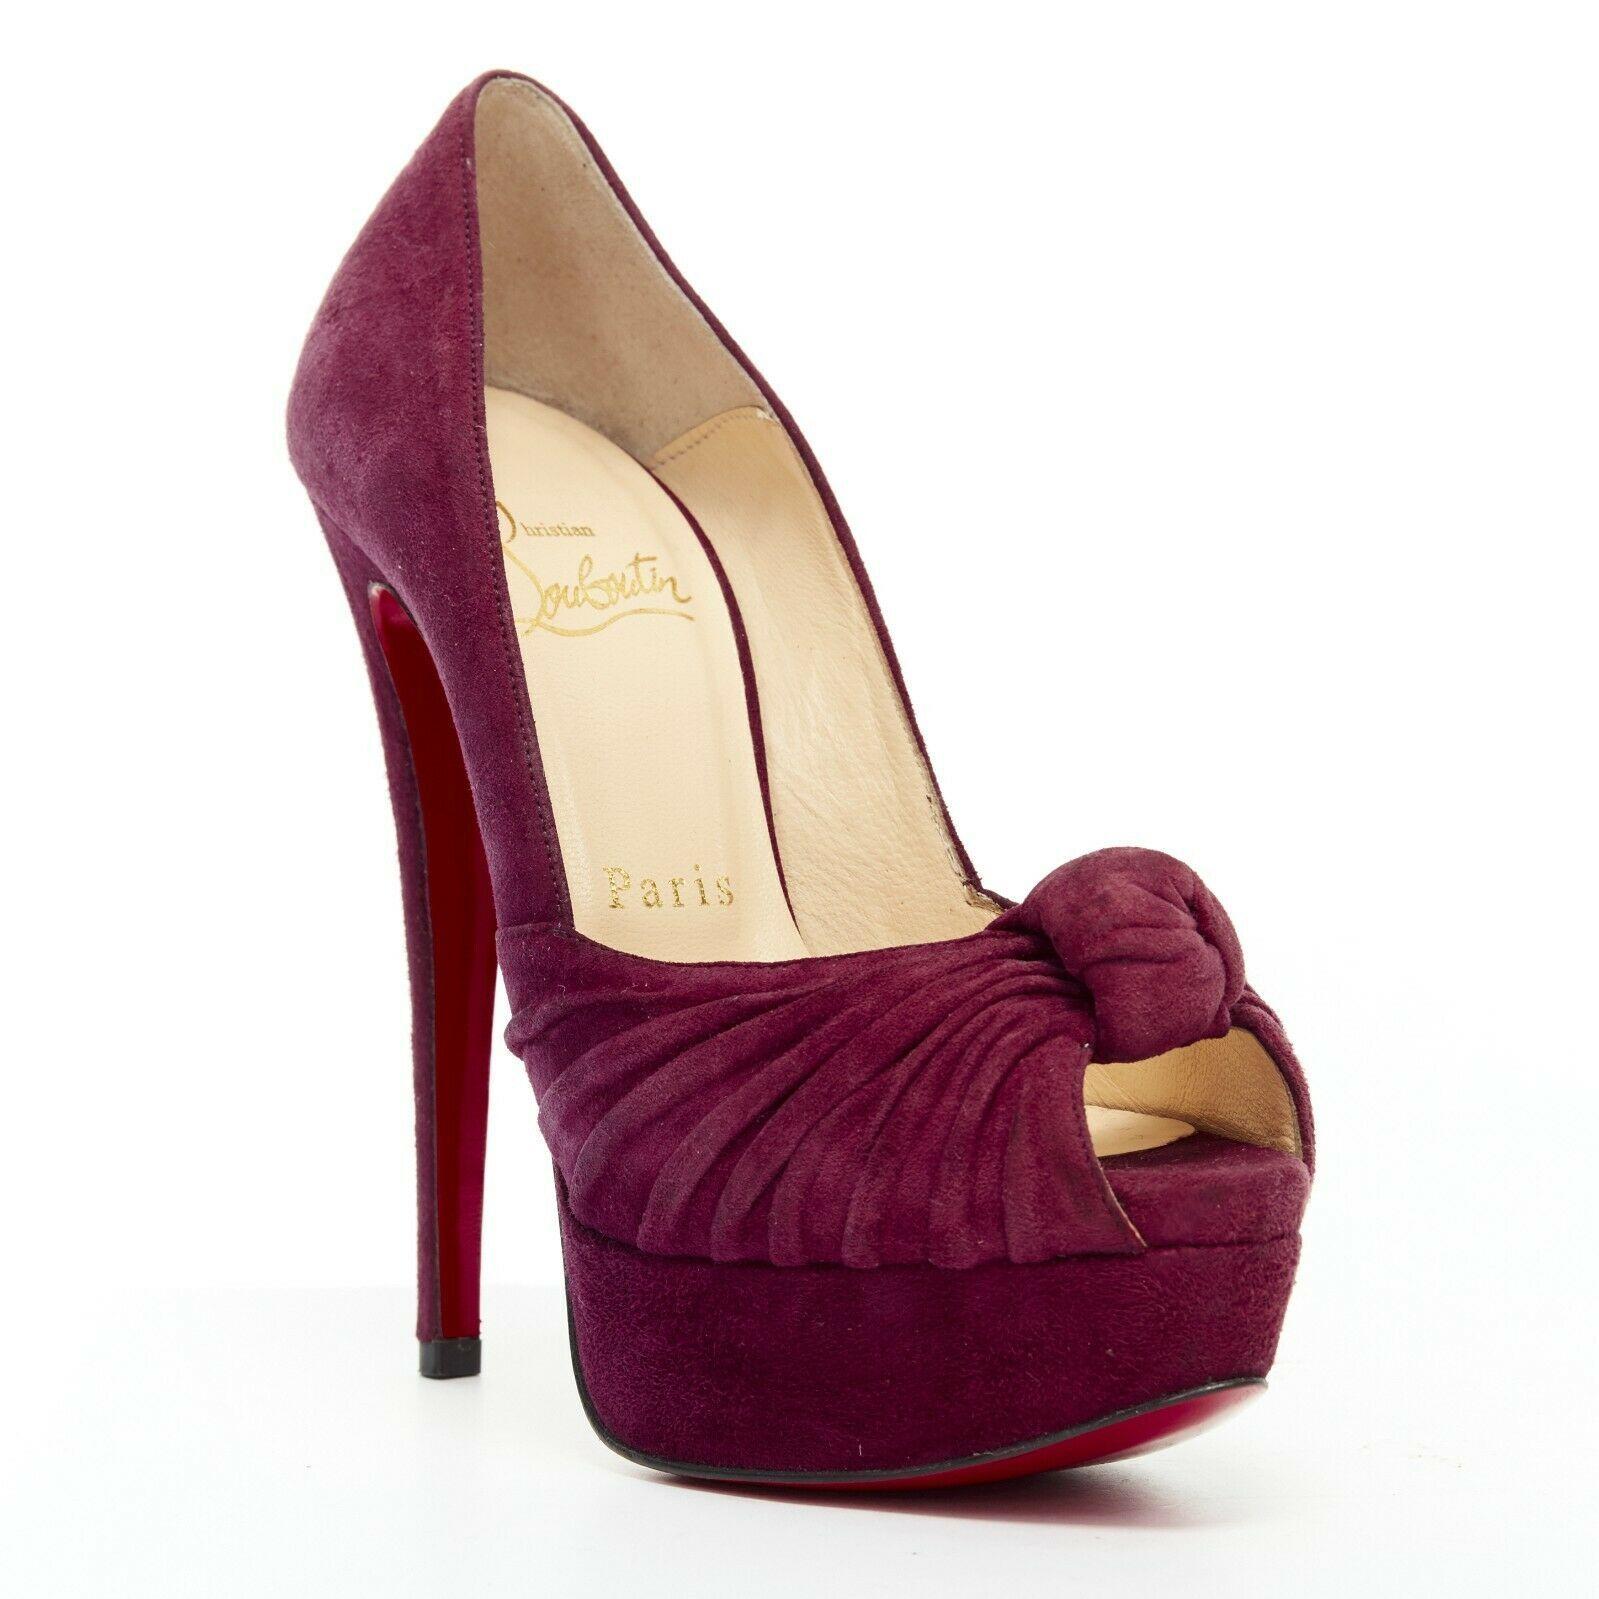 CHRISTIAN LOUBOUTIN Jenny 150 purple suede knot peep toe platform pump EU35.5

CHRISTIAN LOUBOUTIN
Jenny 150. Purple suede leather upper. Knot detail at front. Draped detail at front strap. Peep toe. Platform sole. Padded tan leather lining.